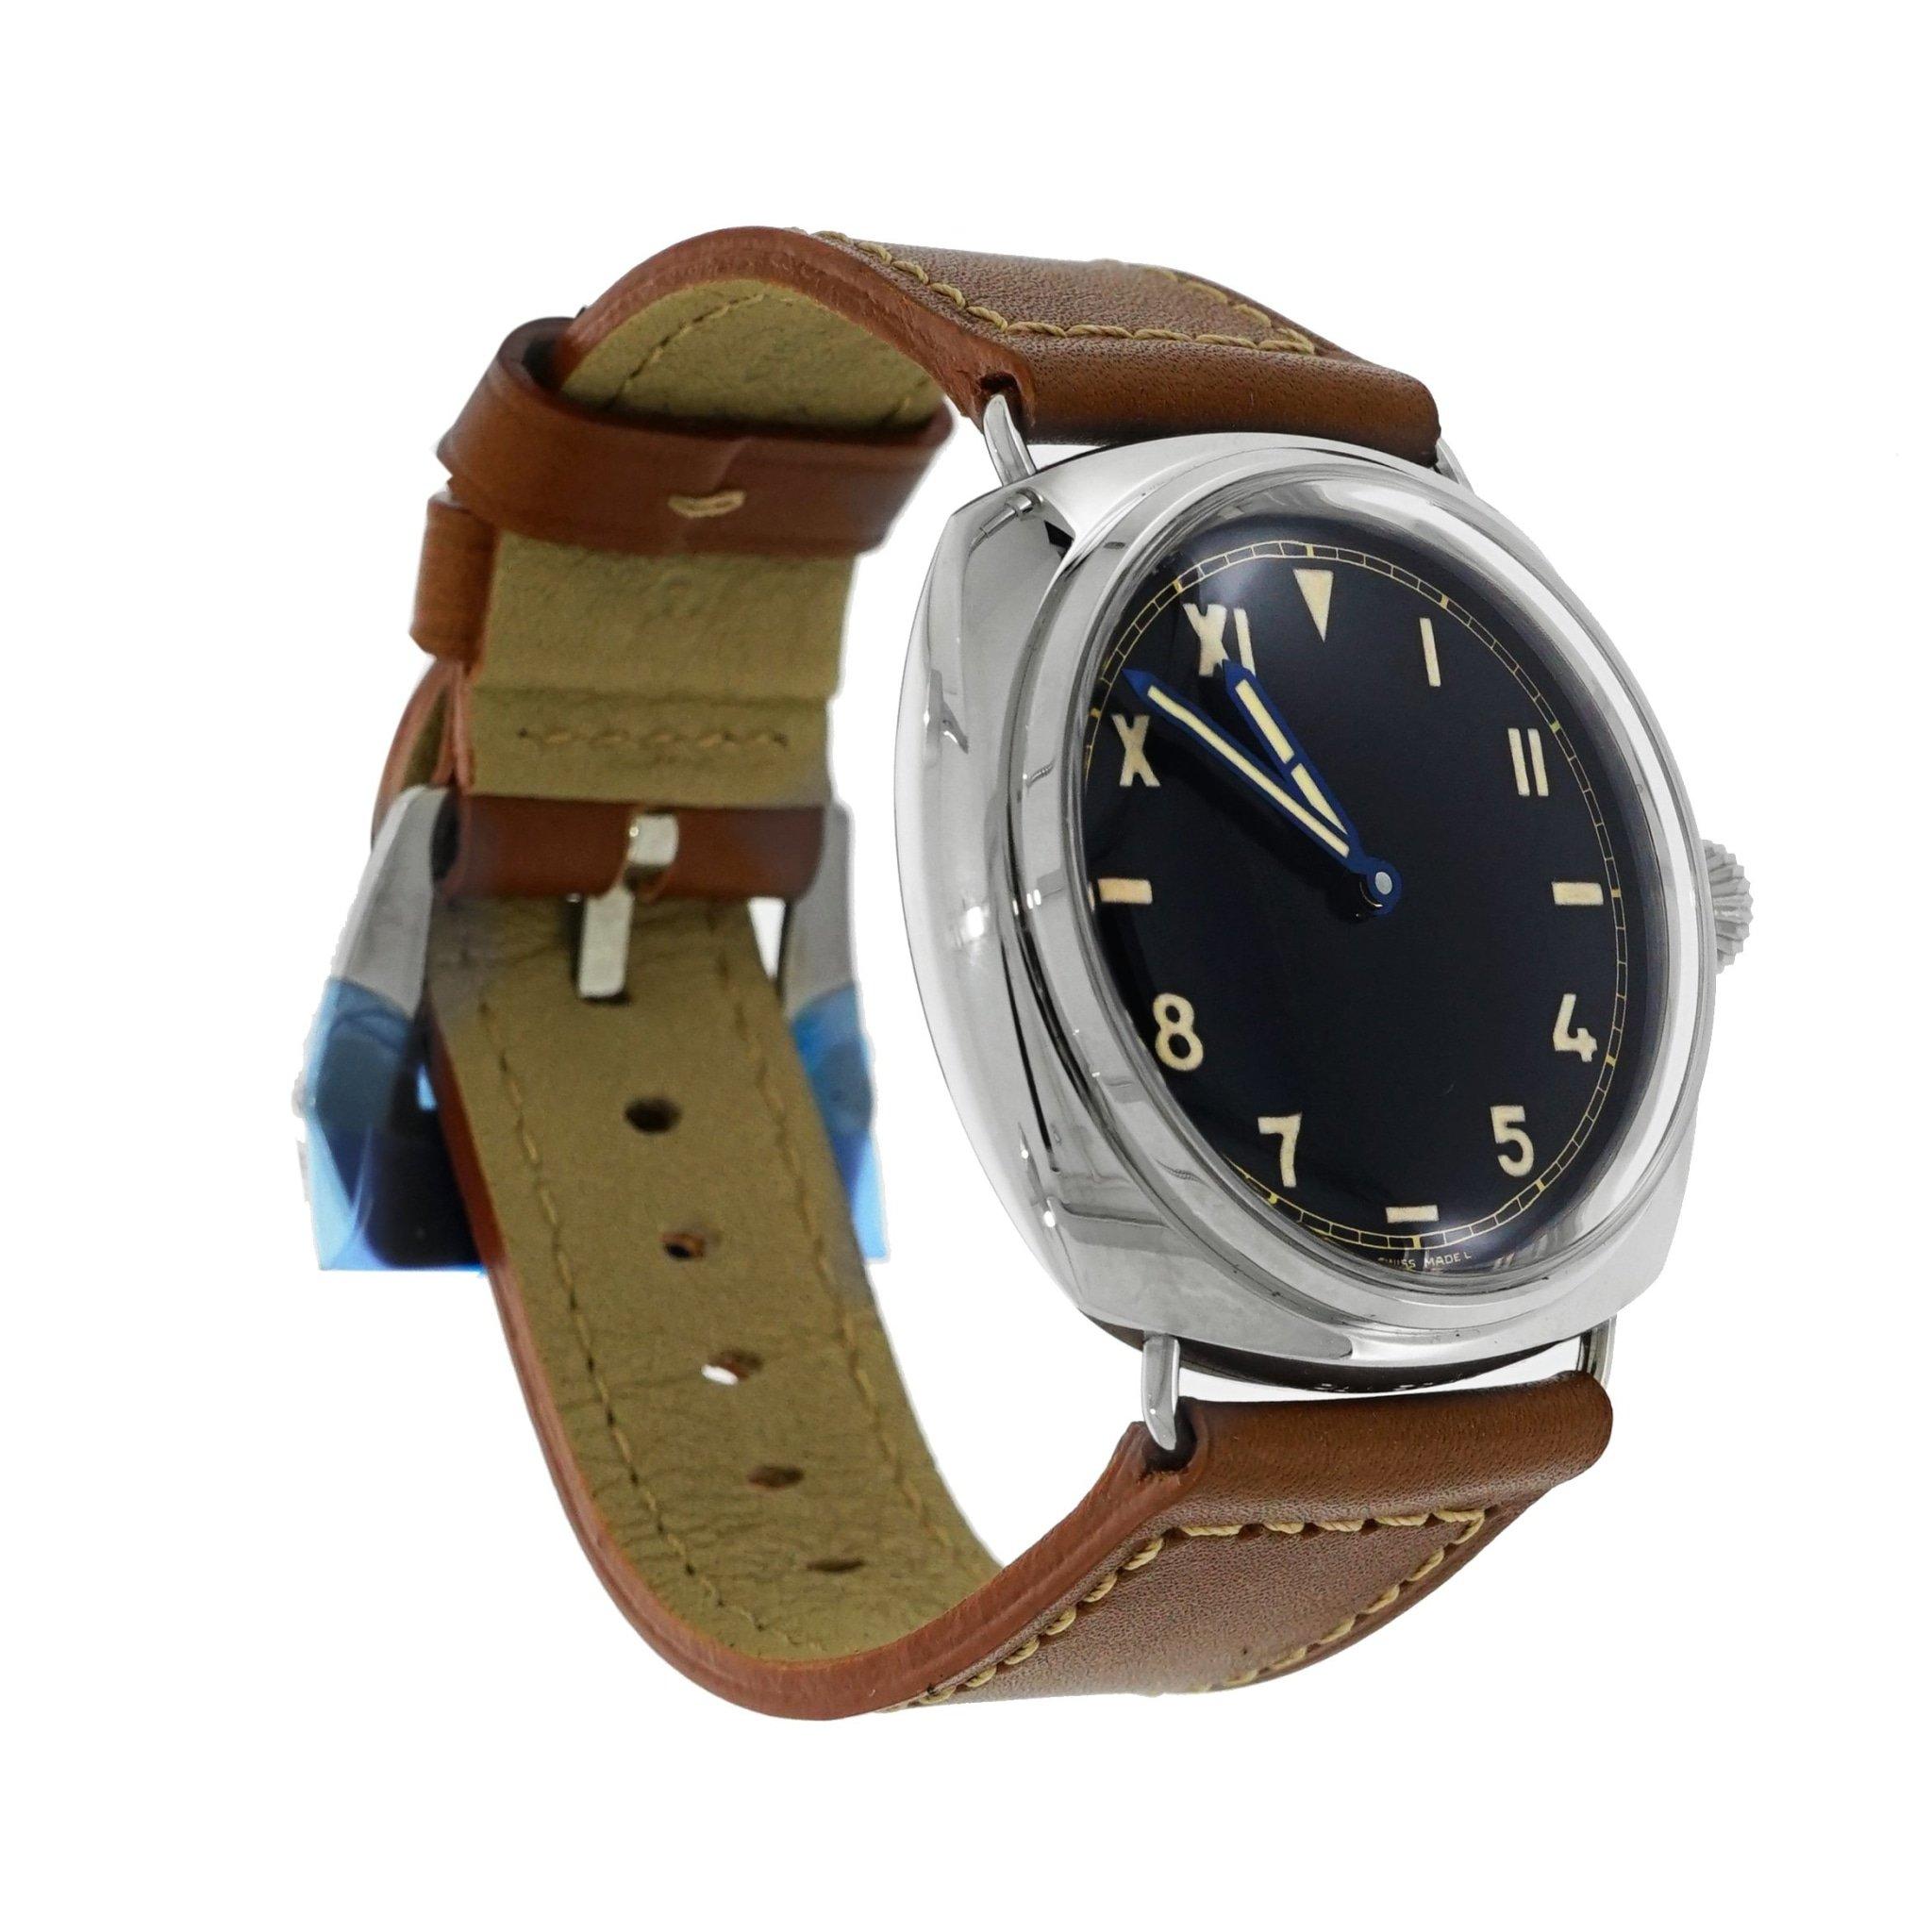 Panerai Radiomir 1936 Limited Edition, released in honor of the company’s prototypes as a tribute to the watches from over 80 years ago with practical modern touches to suit today’s lifestyle. 
Faithfully made to mirror the design of the original